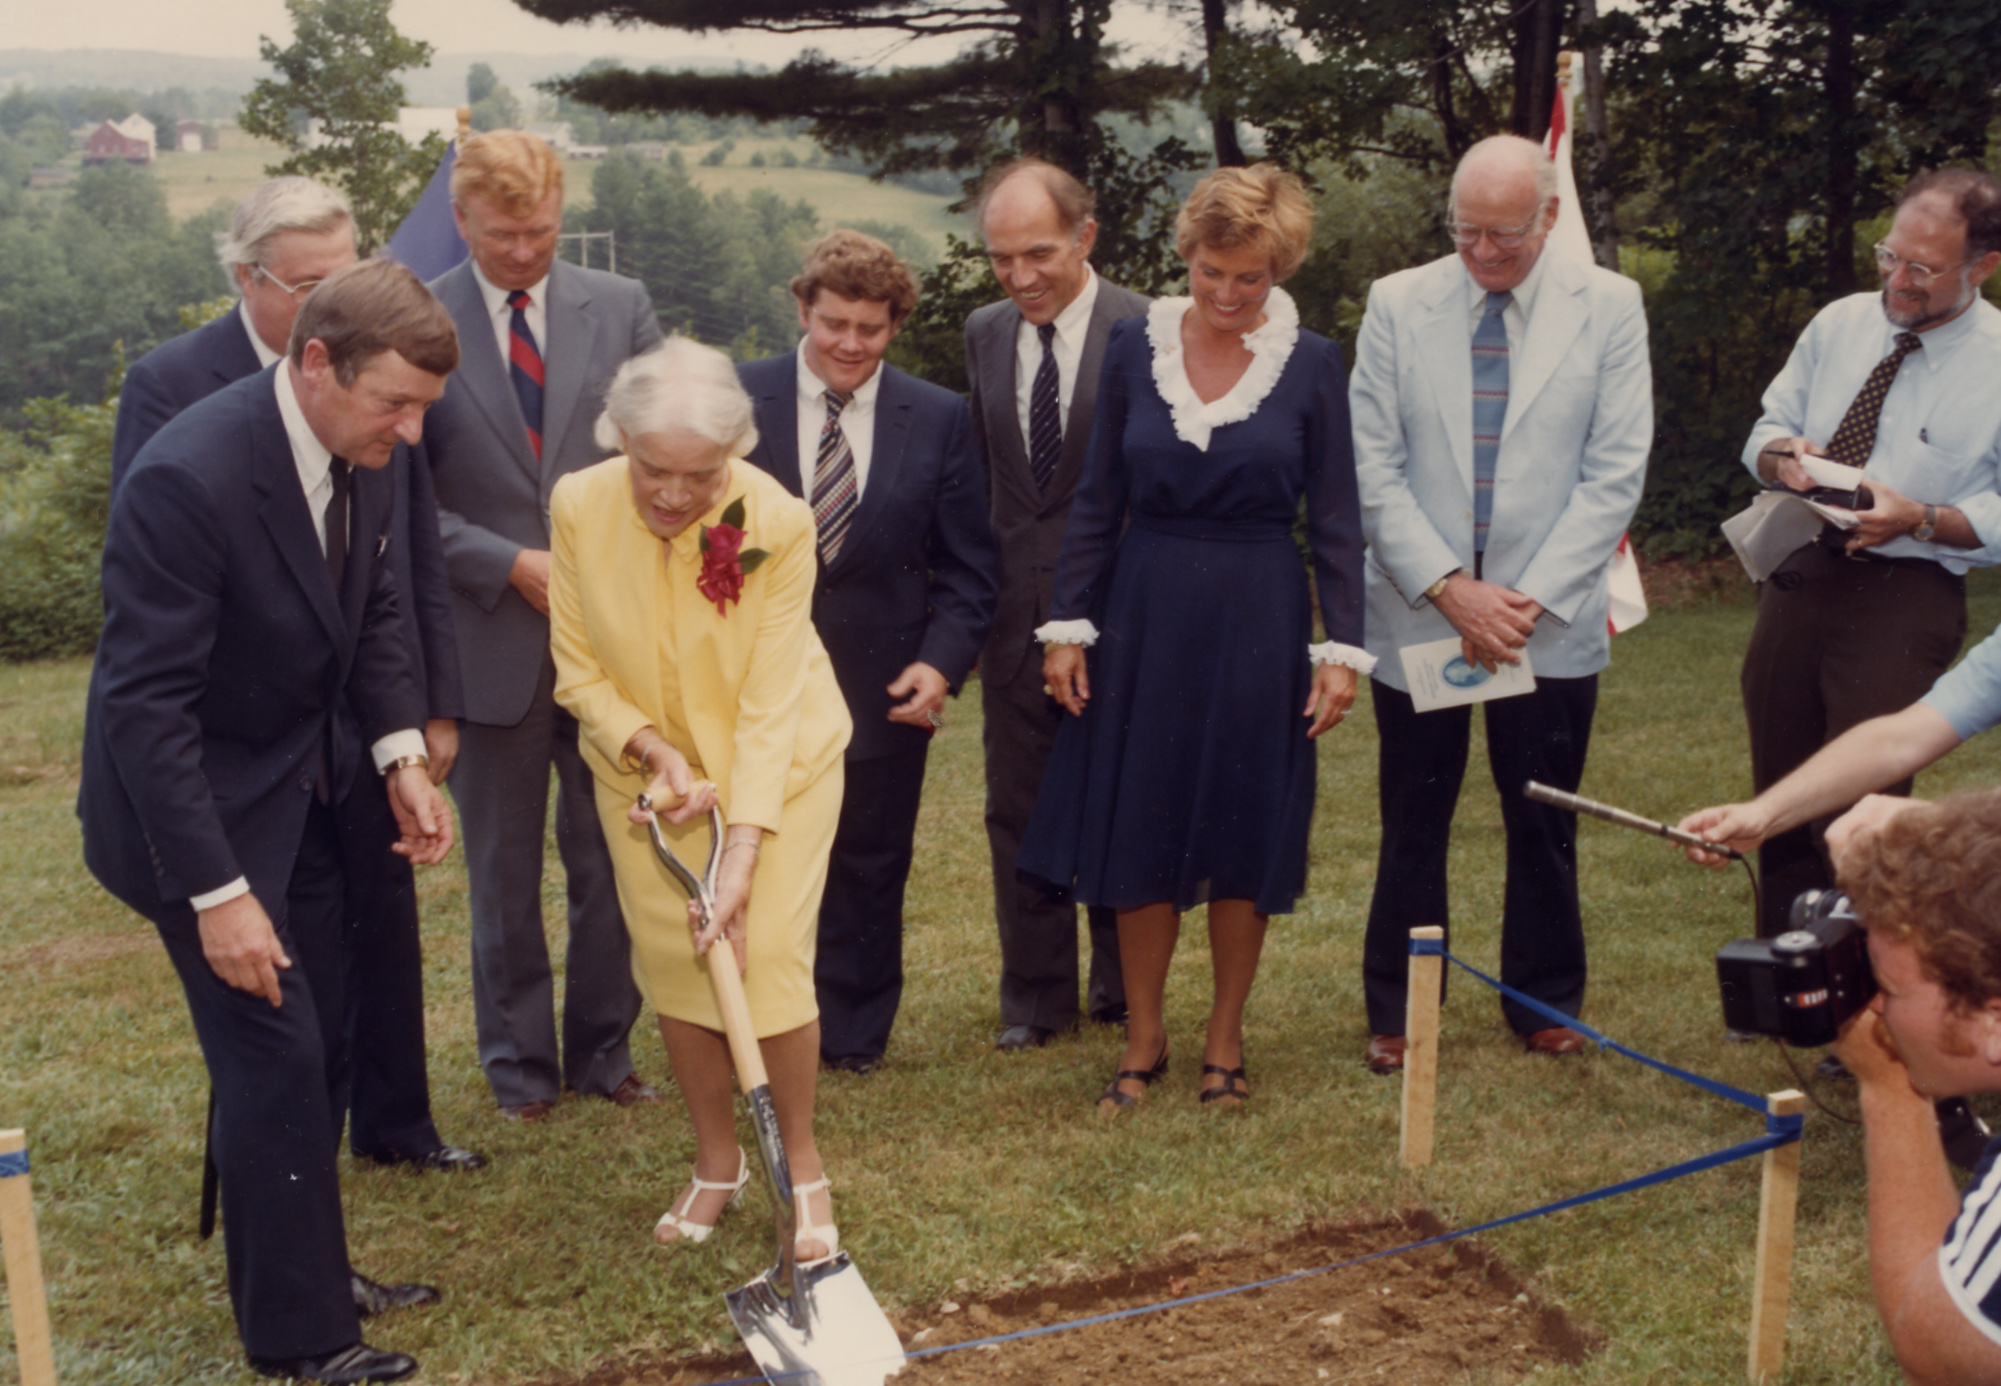 1982: Dedicates the Margaret Chase Smith Library.